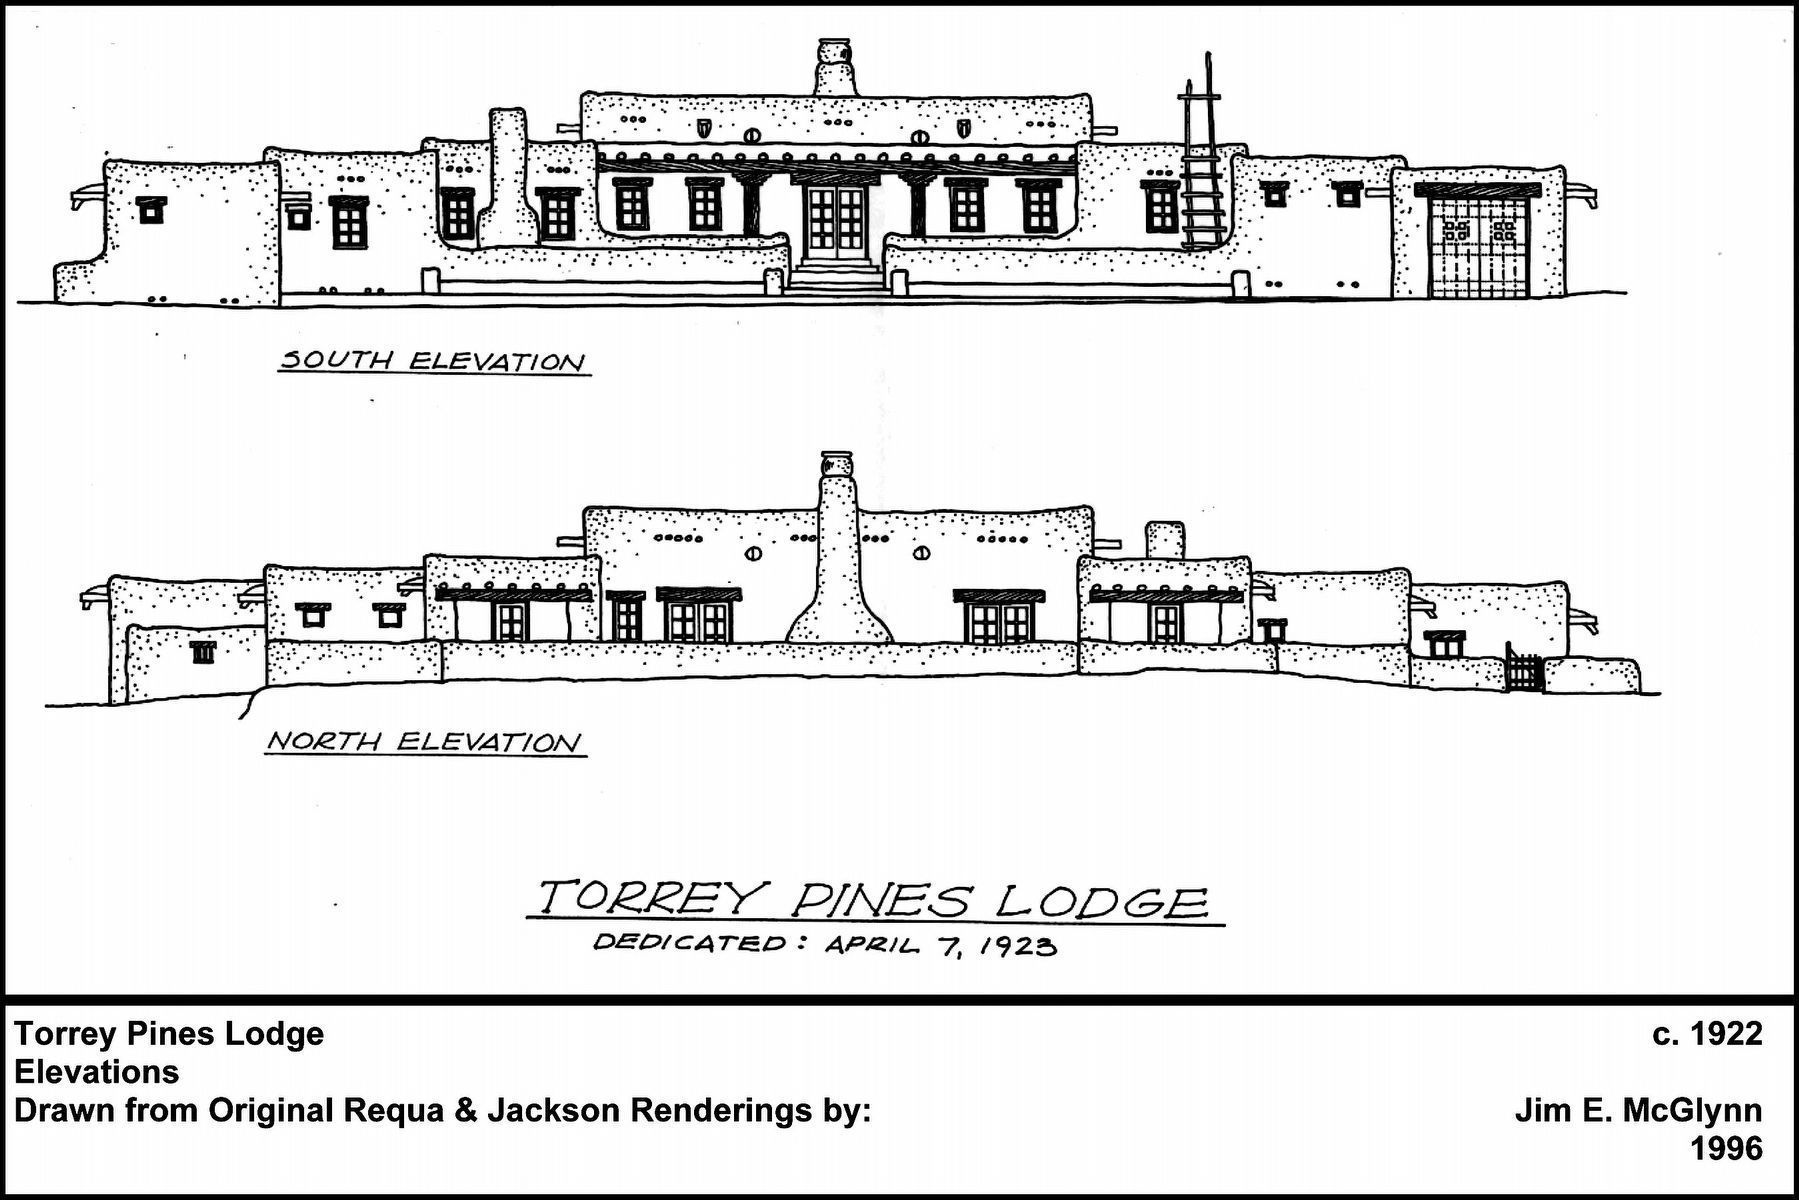 Torrey Pines Lodge<br>Dedicated April 7, 1923 image. Click for full size.